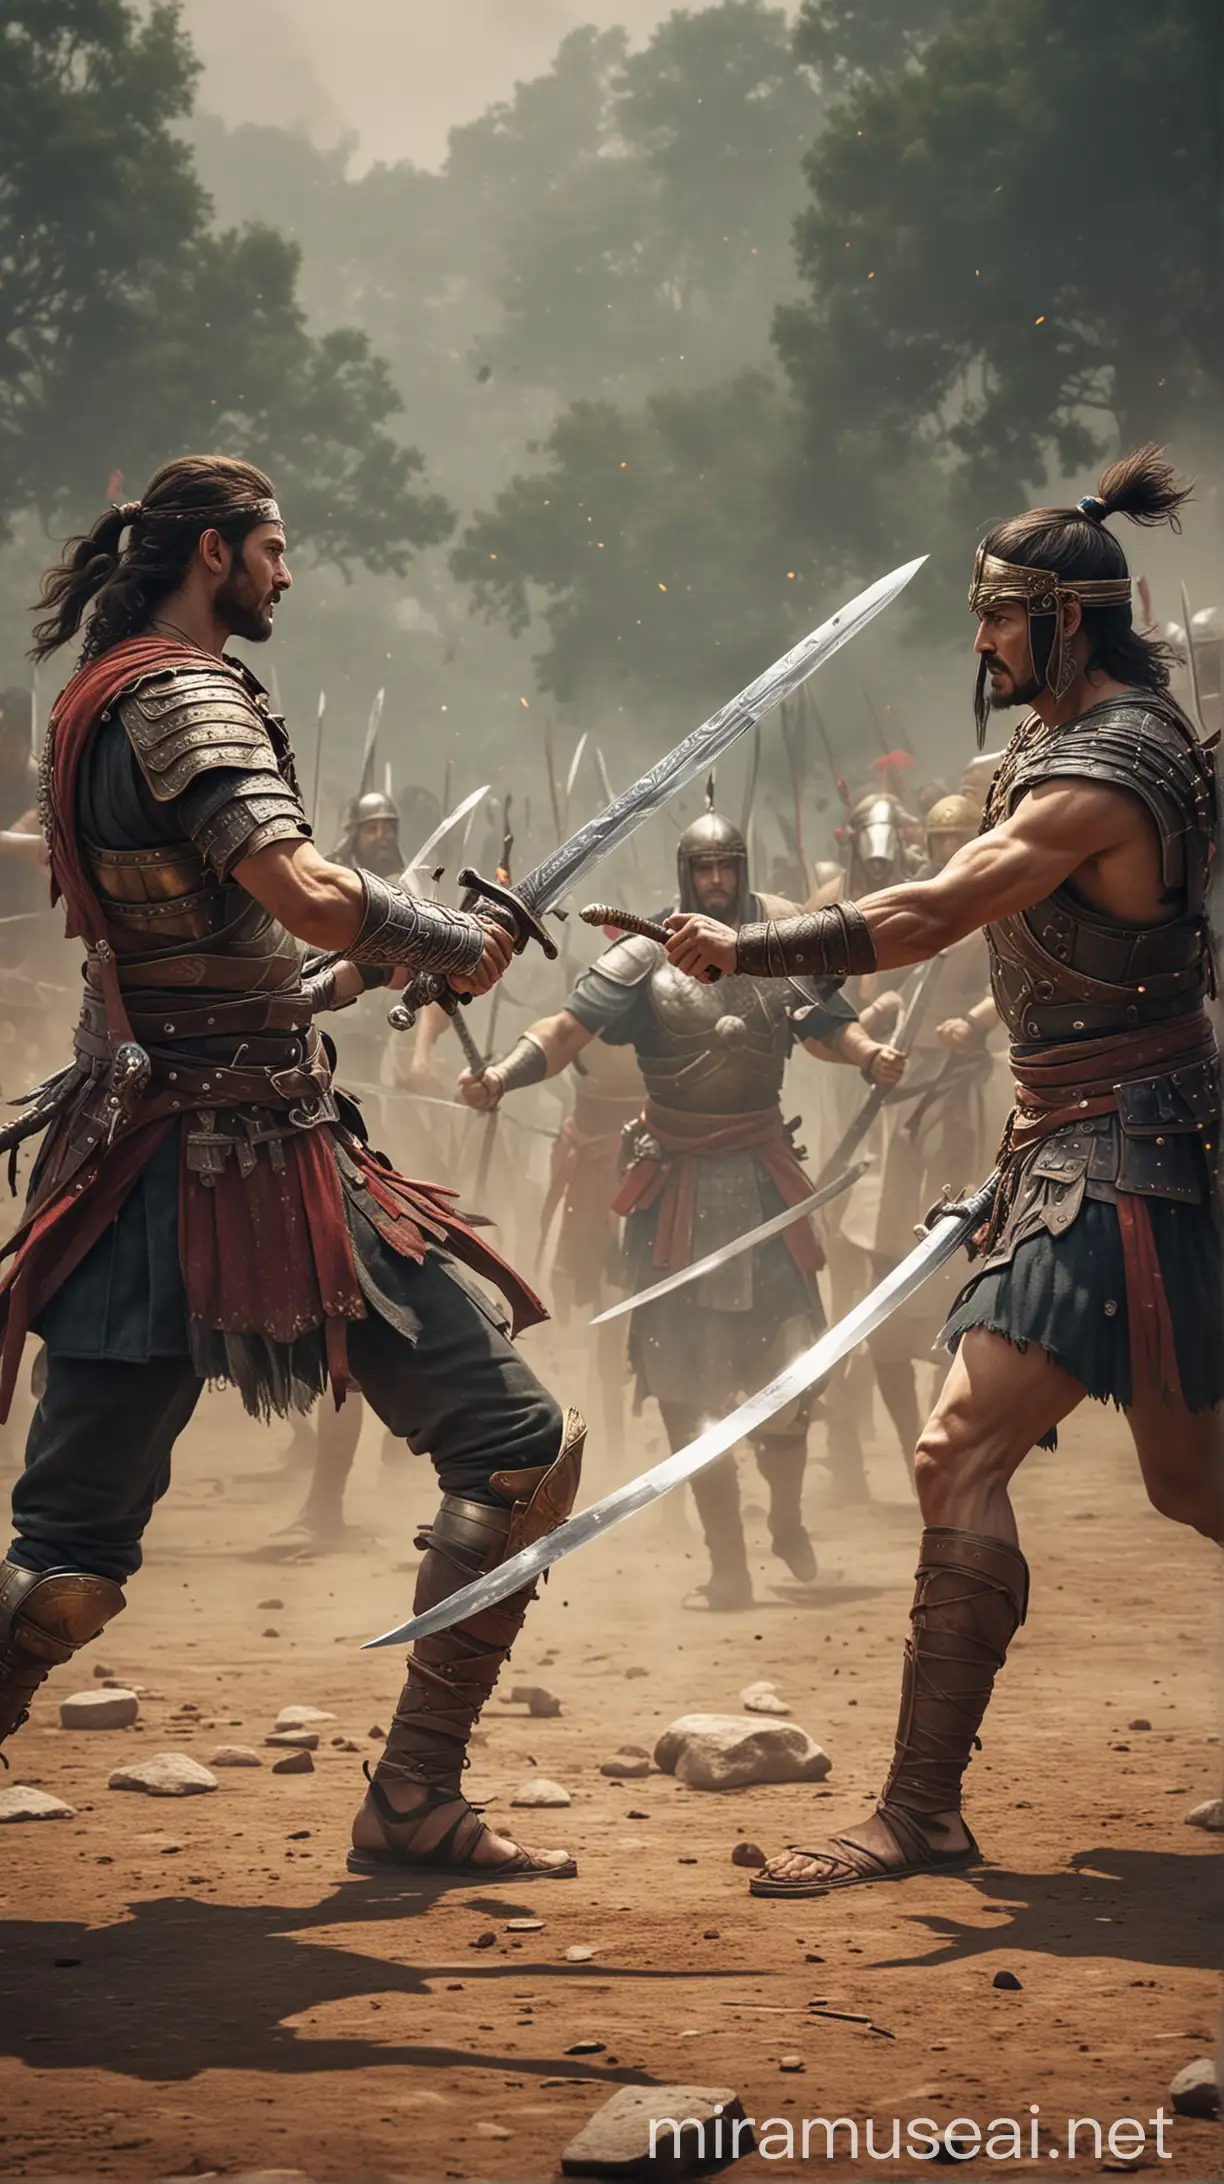 Epic Sword Fight War in the Ancient World